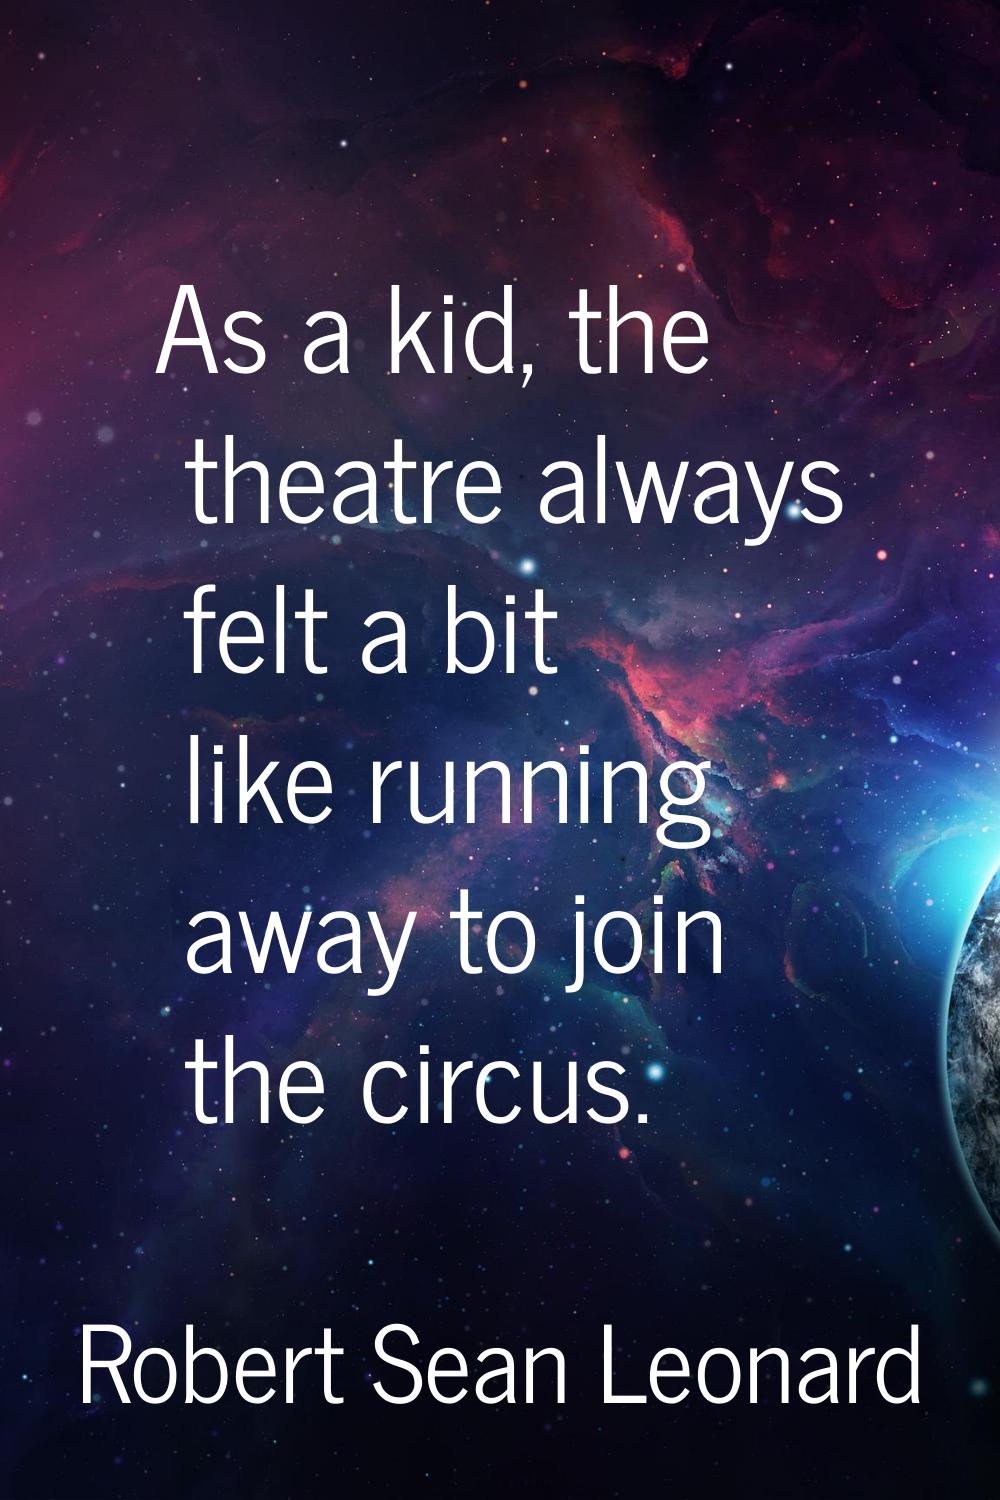 As a kid, the theatre always felt a bit like running away to join the circus.